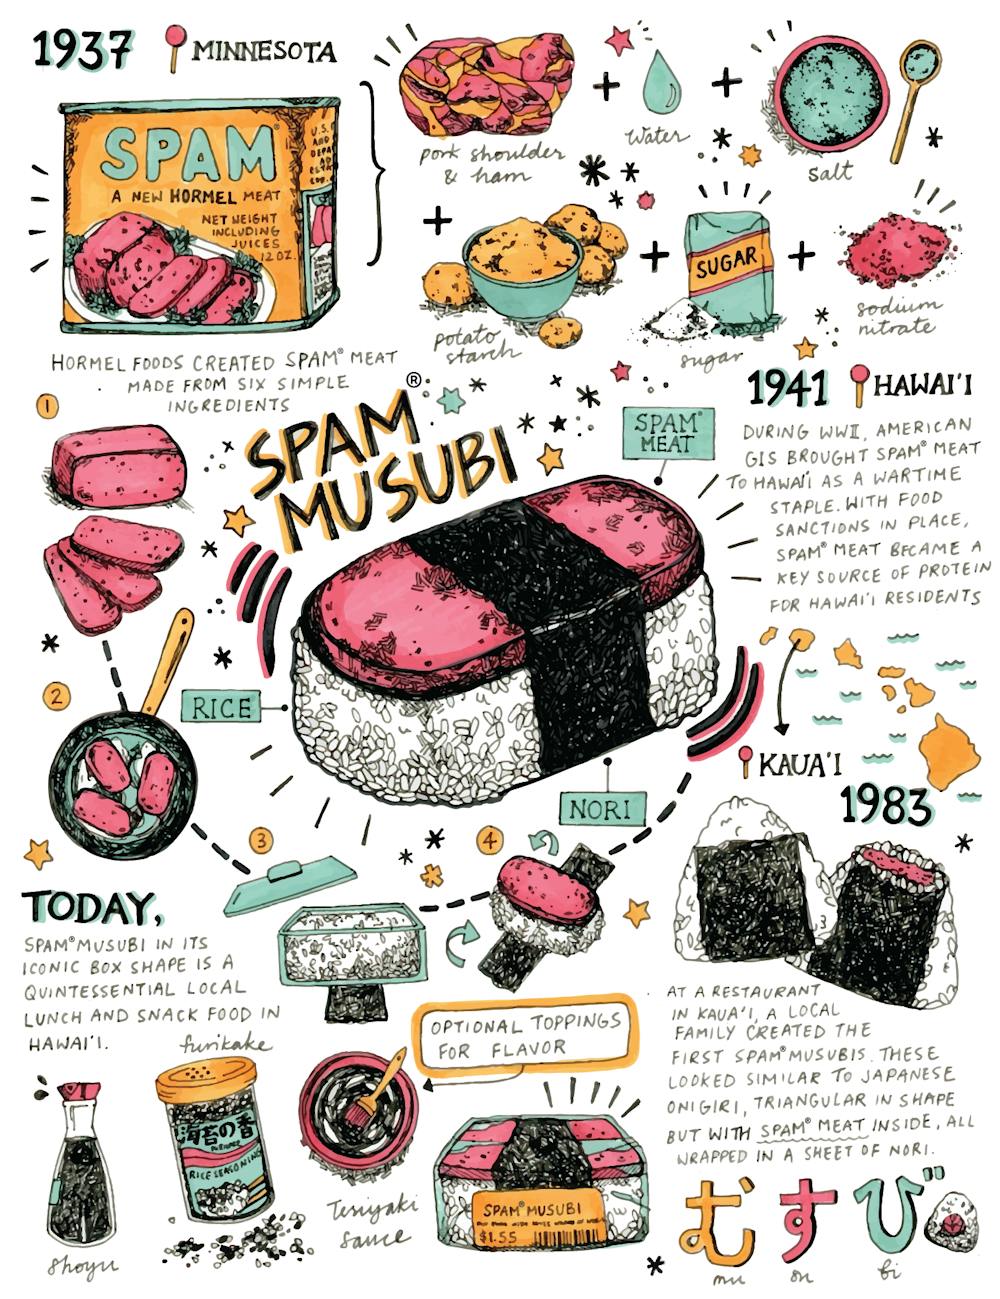 Learn about the history of the SPAM® Musubi here!